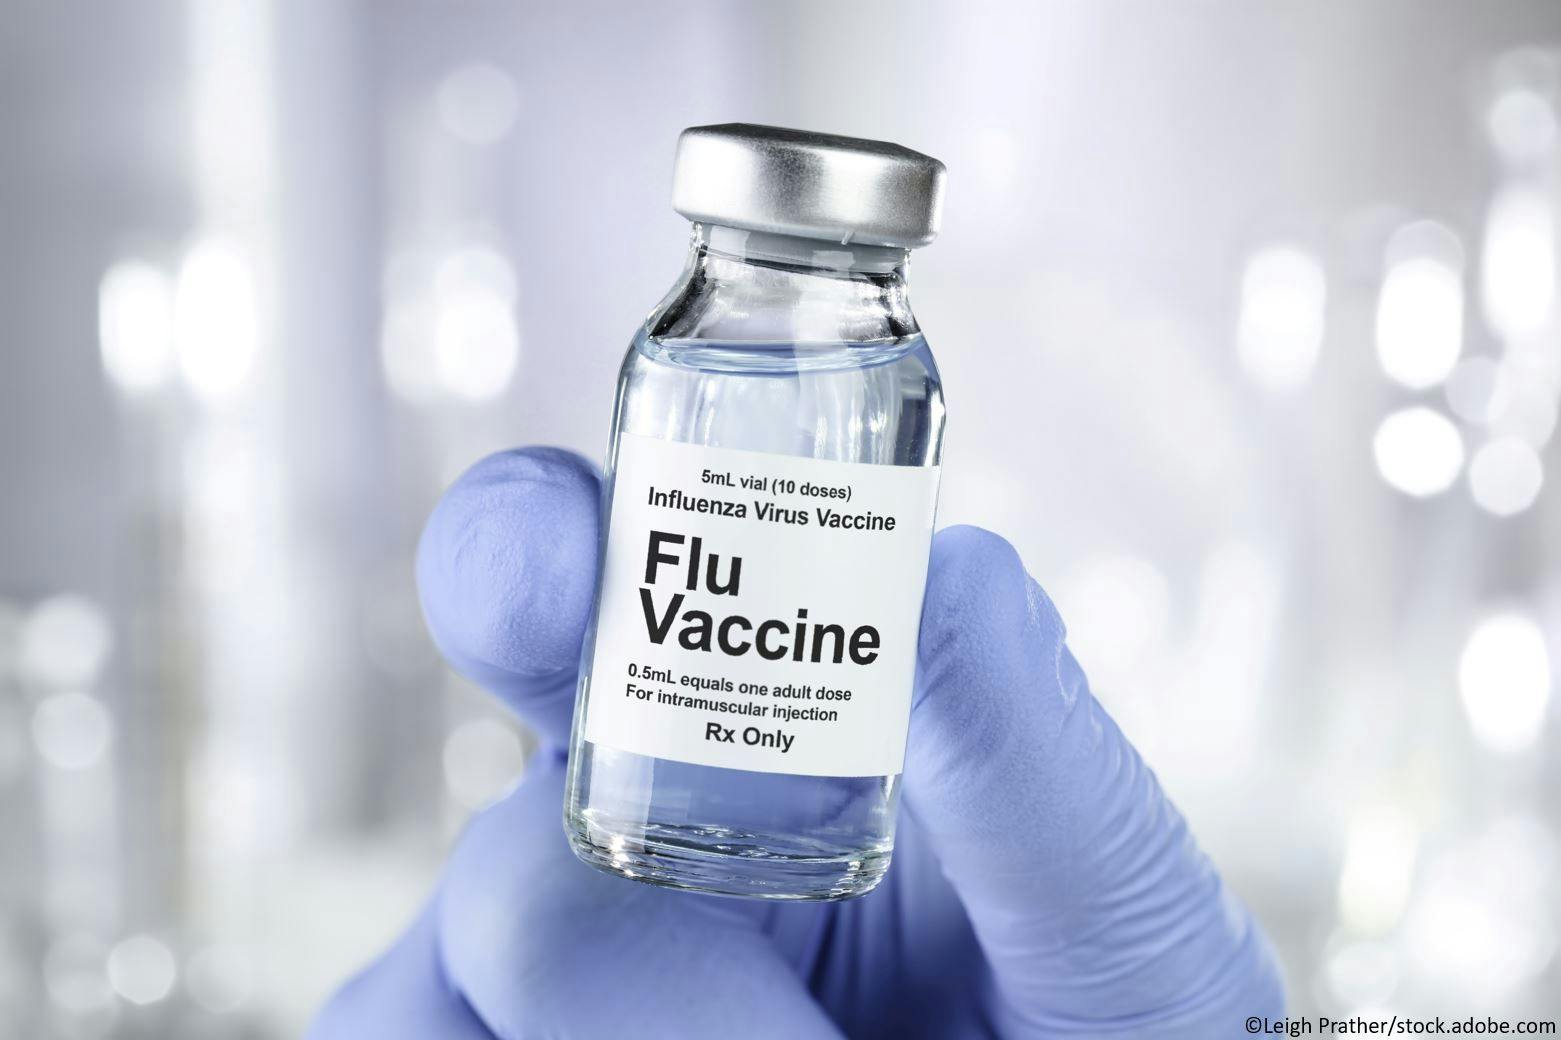 Flu Shots for Your Patients Aged ≥65 Years: 2 Questions  image credit ©Leigh Prather/stock.adobe.com